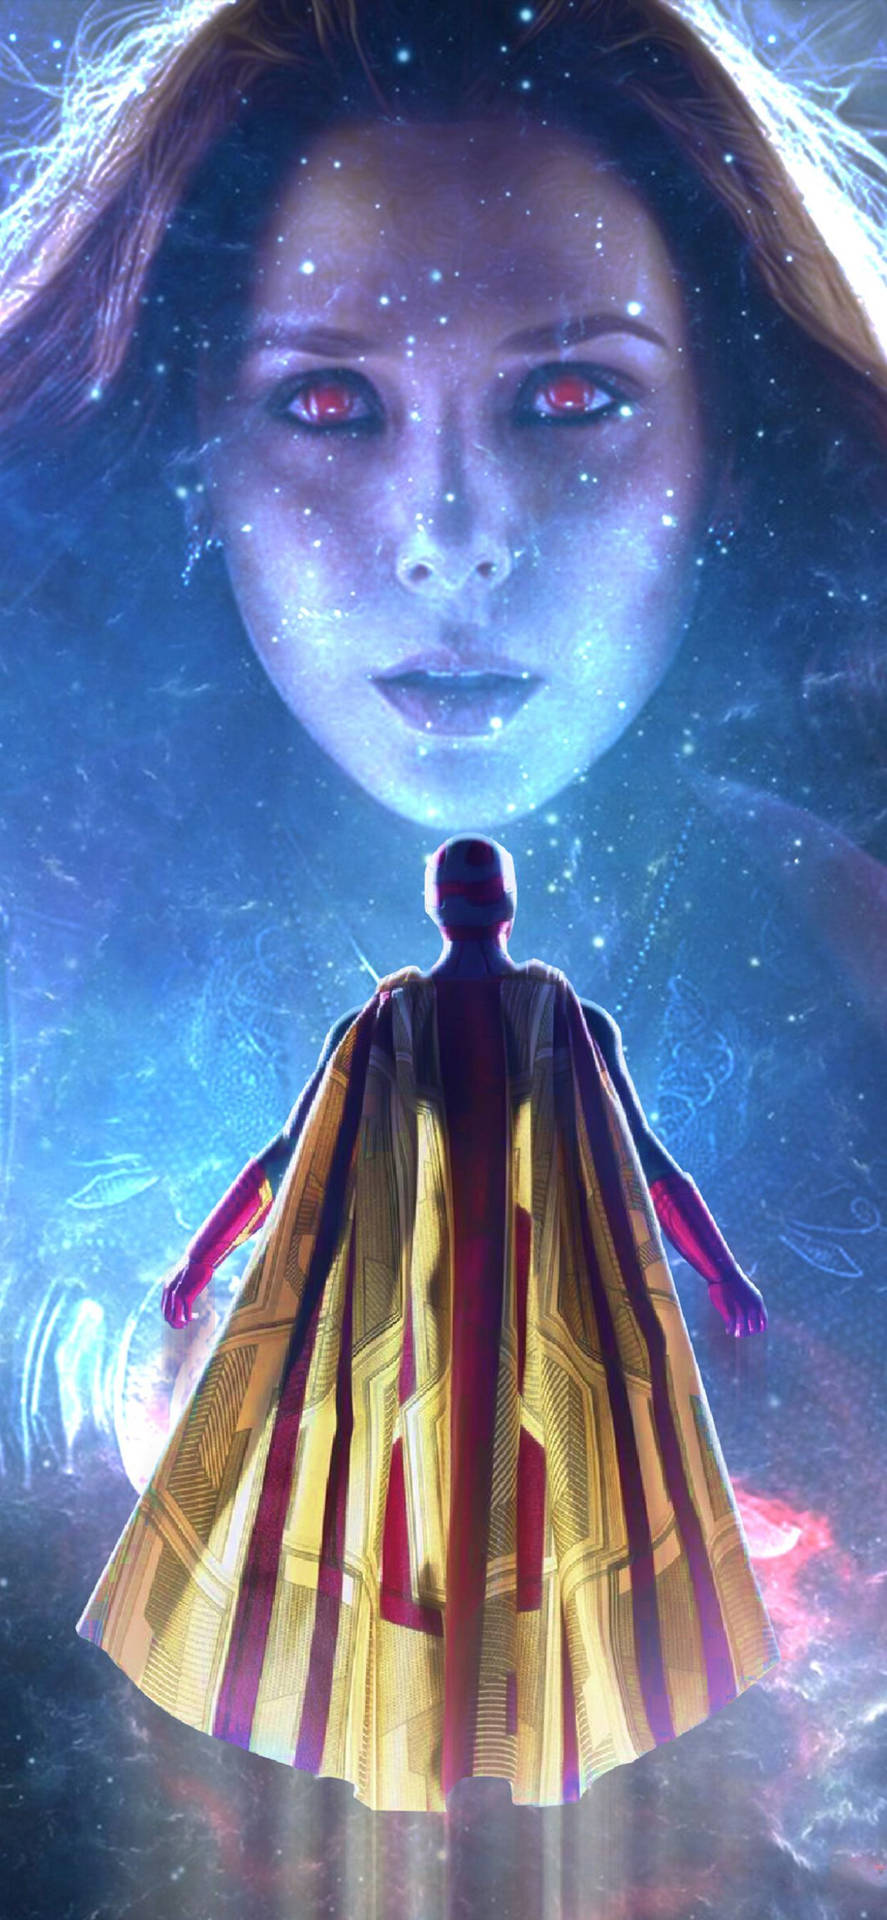 The compelling duo of Wanda Maximoff (Scarlett Witch) and Vision take a break in space while they navigate the twisted realities they find themselves in. Wallpaper